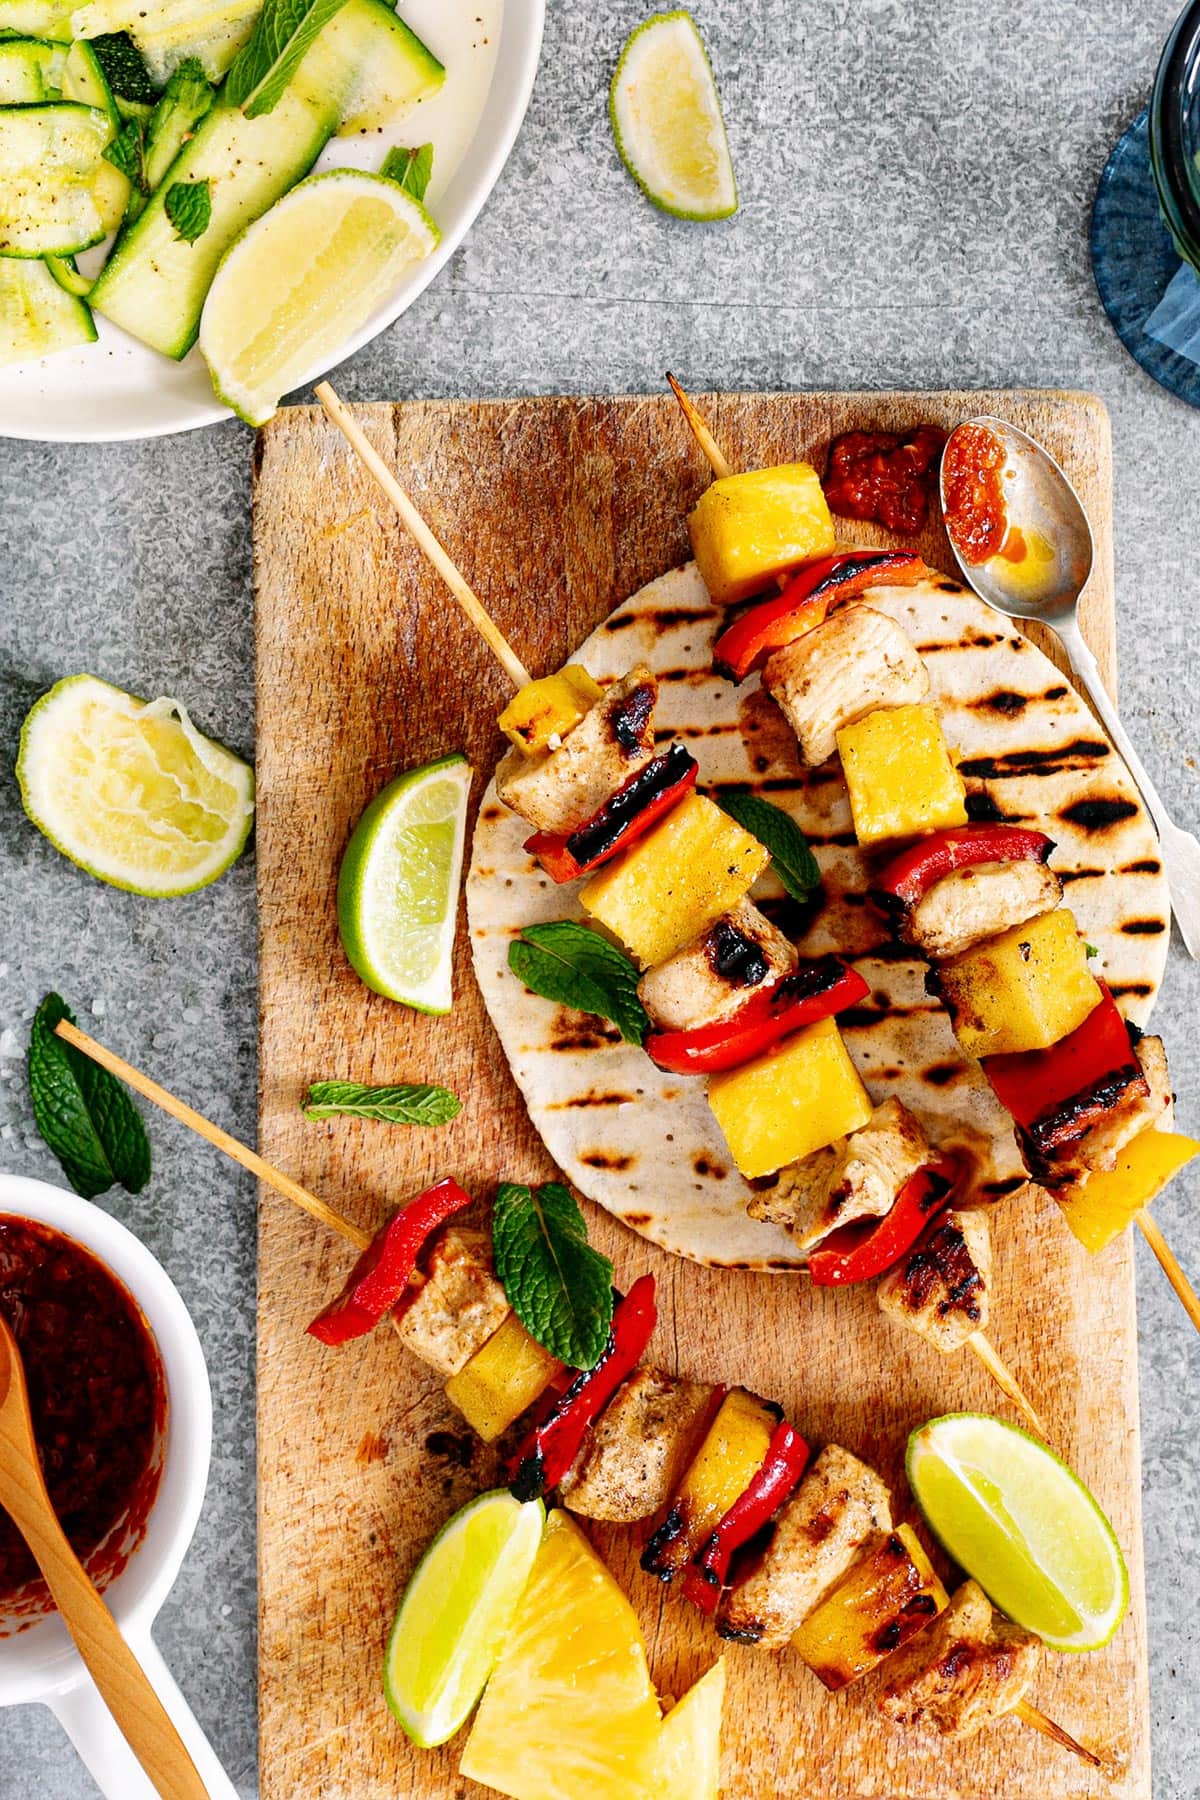 Brochetas de pollo, also known as Mexican chicken skewers placed on grilled tortillas, with lime wedges and salsa on the side.